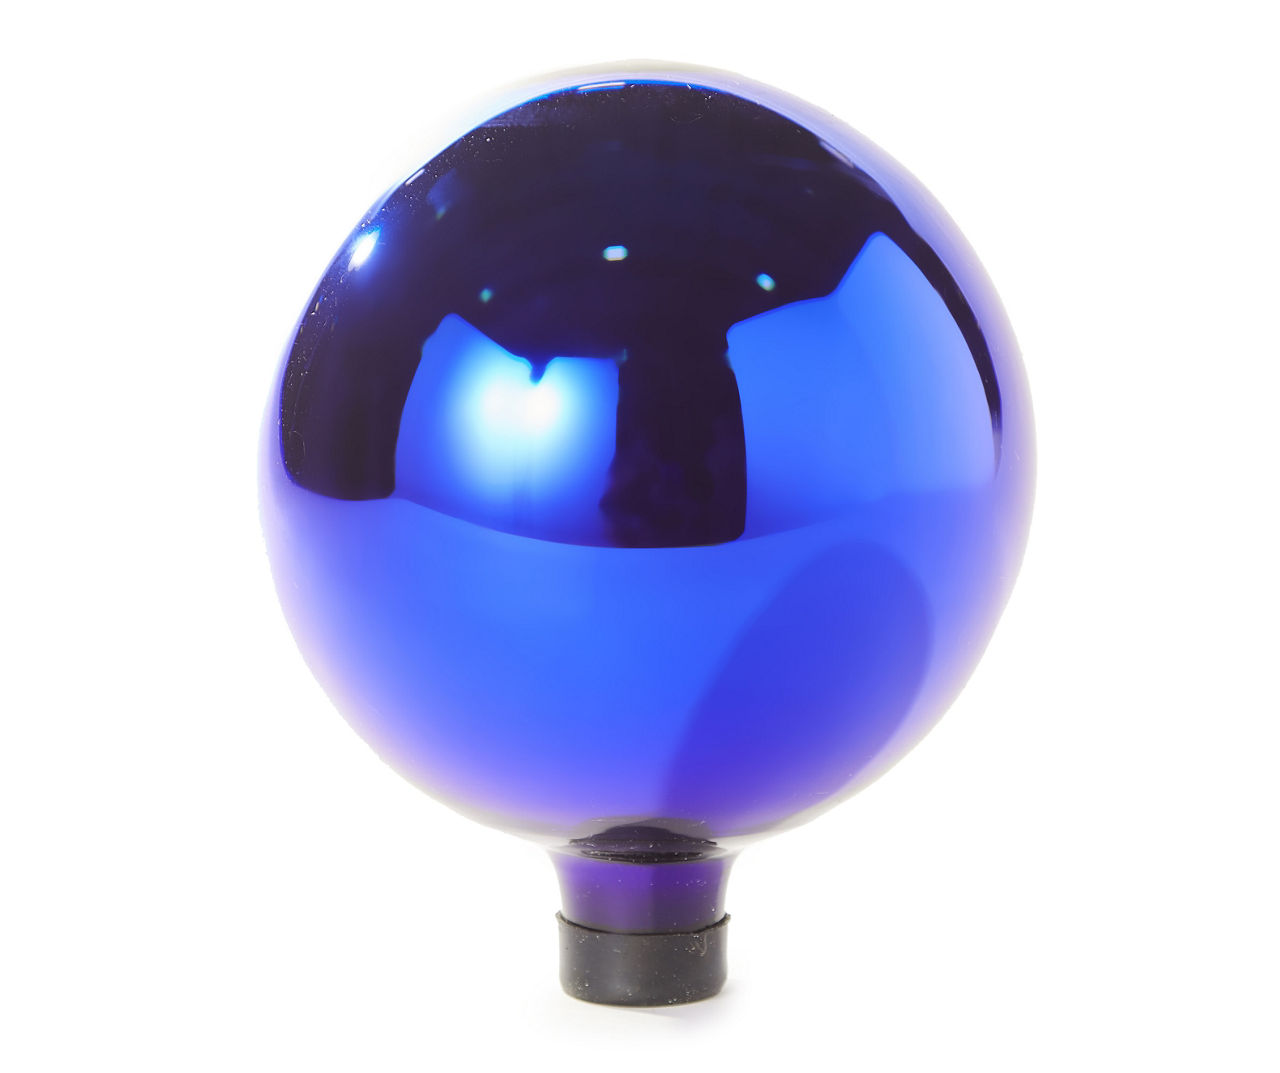 ahmad nabaa recommends Big Lots Gazing Ball Stands